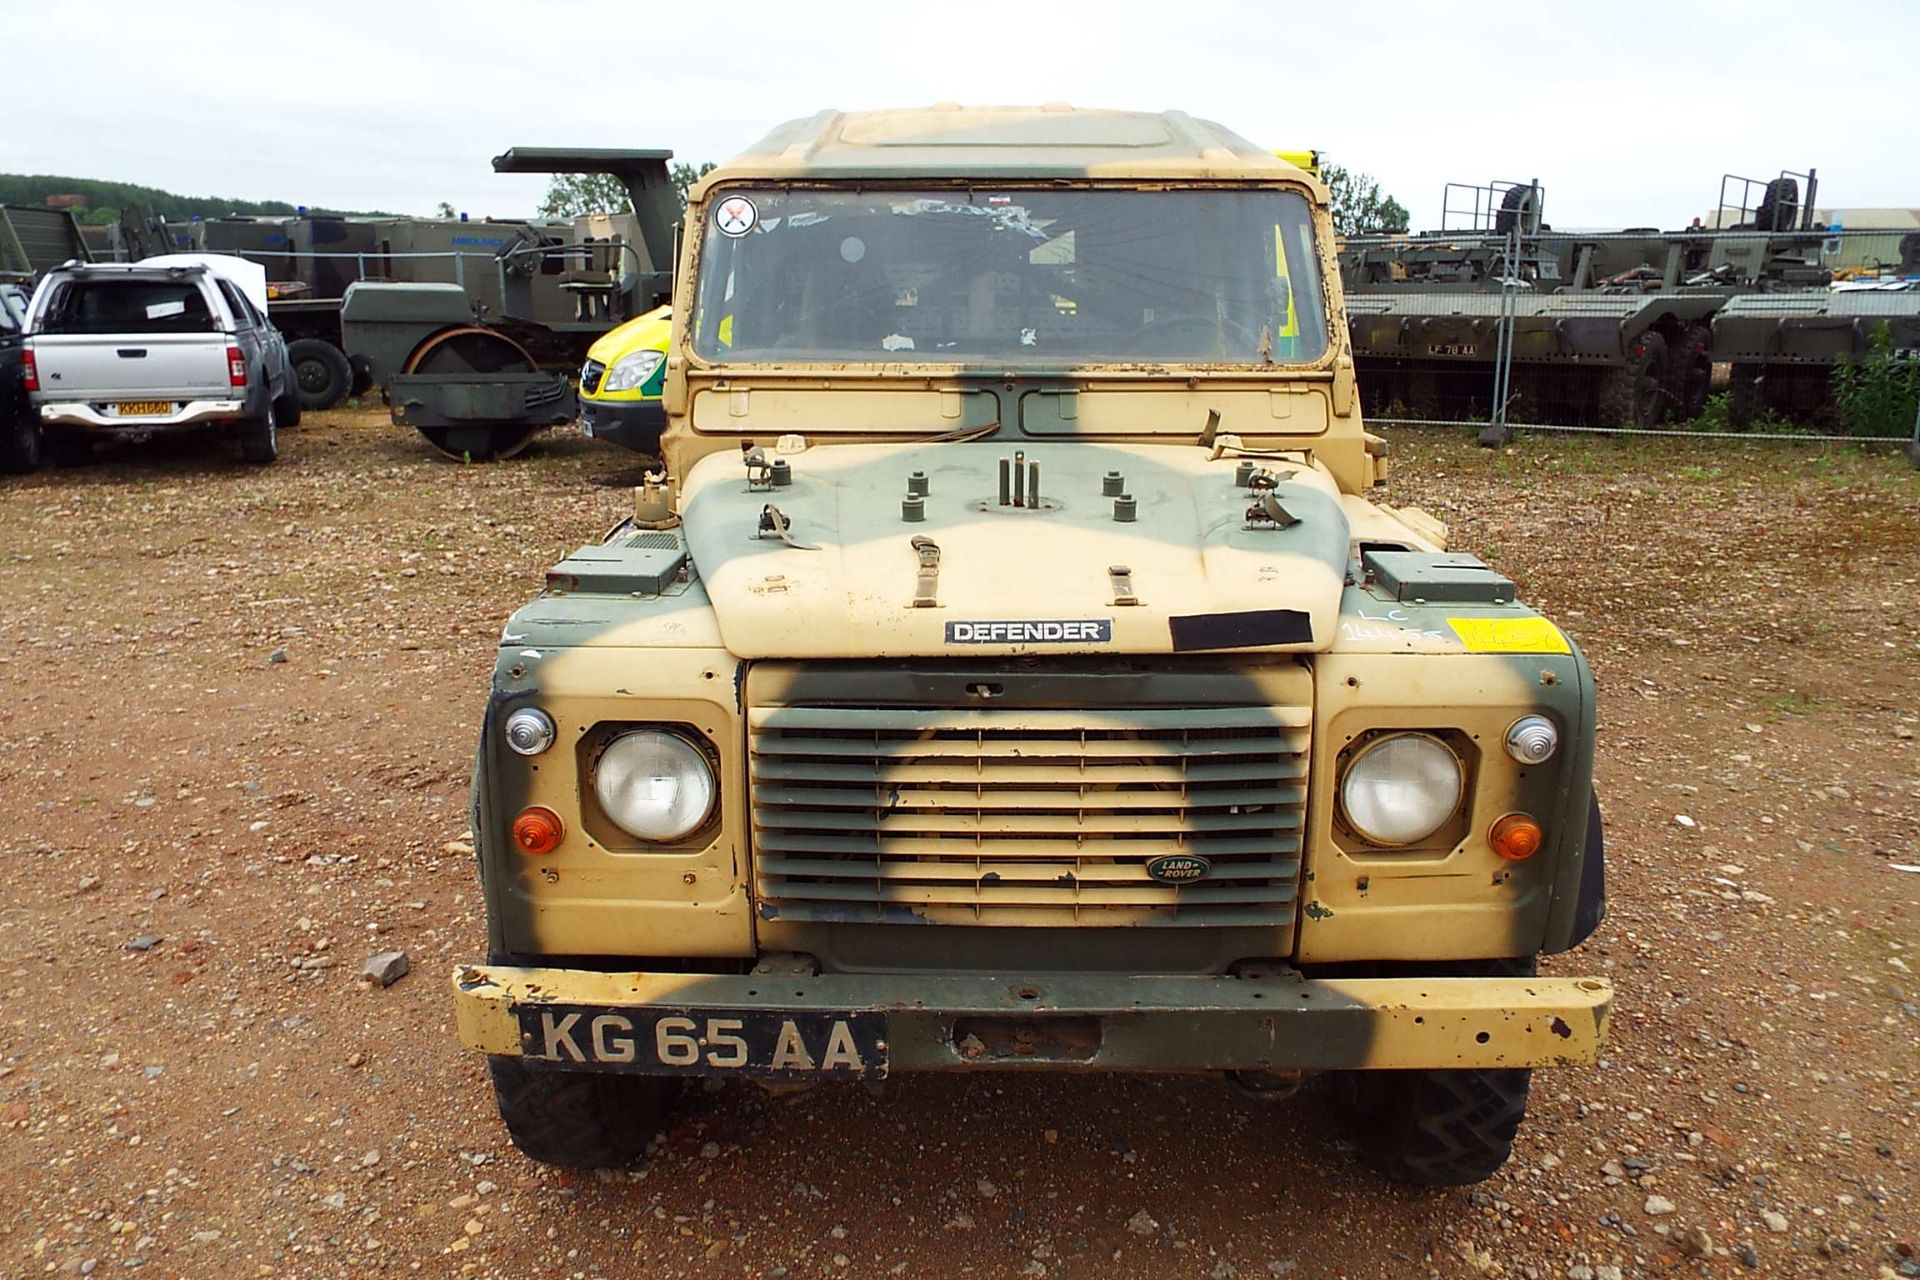 Military Specification LHD Land Rover Wolf 110 Hard Top - Image 2 of 21